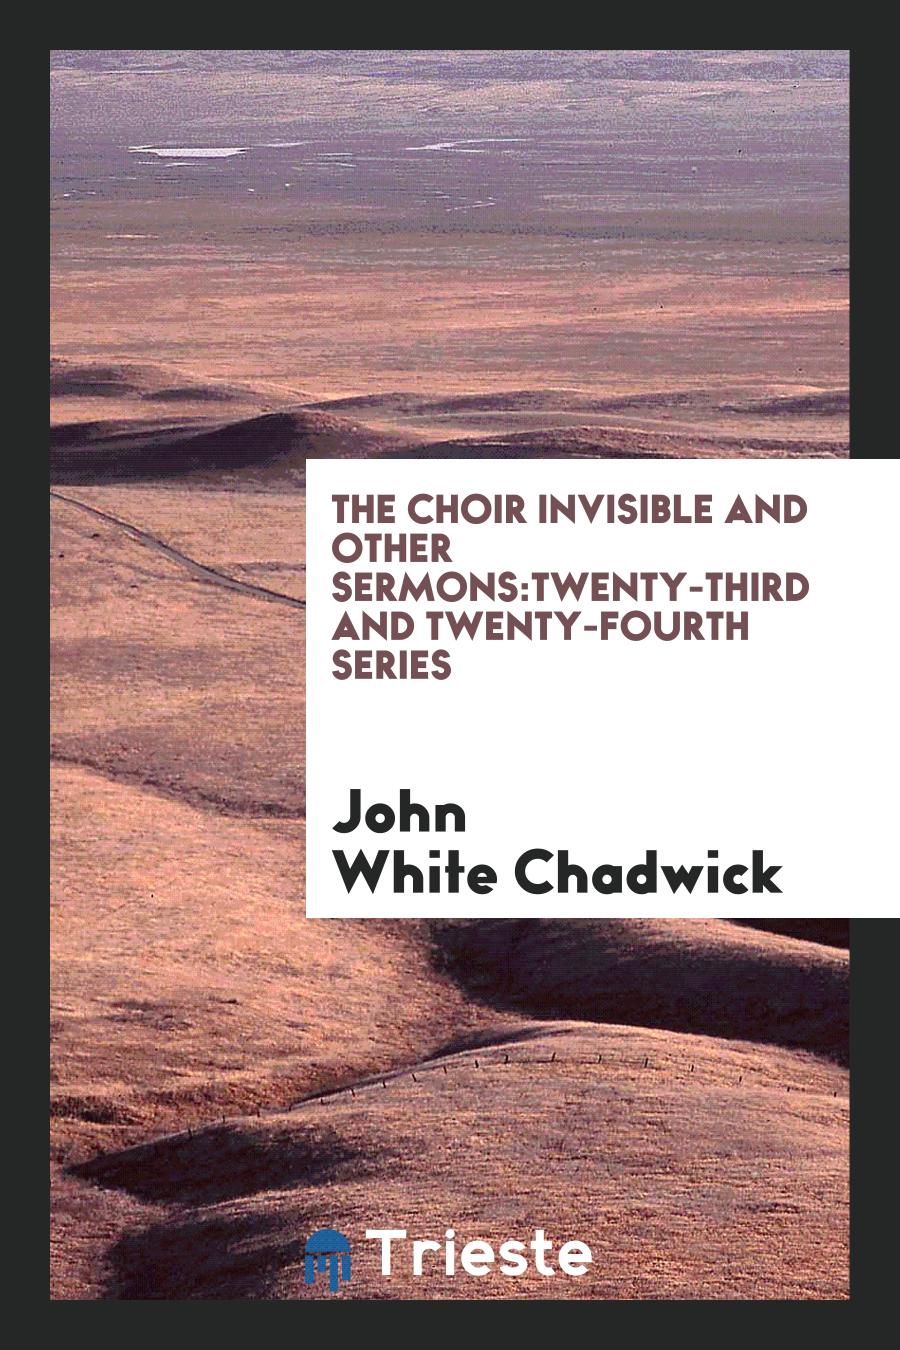 The Choir Invisible and Other Sermons:Twenty-Third and Twenty-Fourth Series